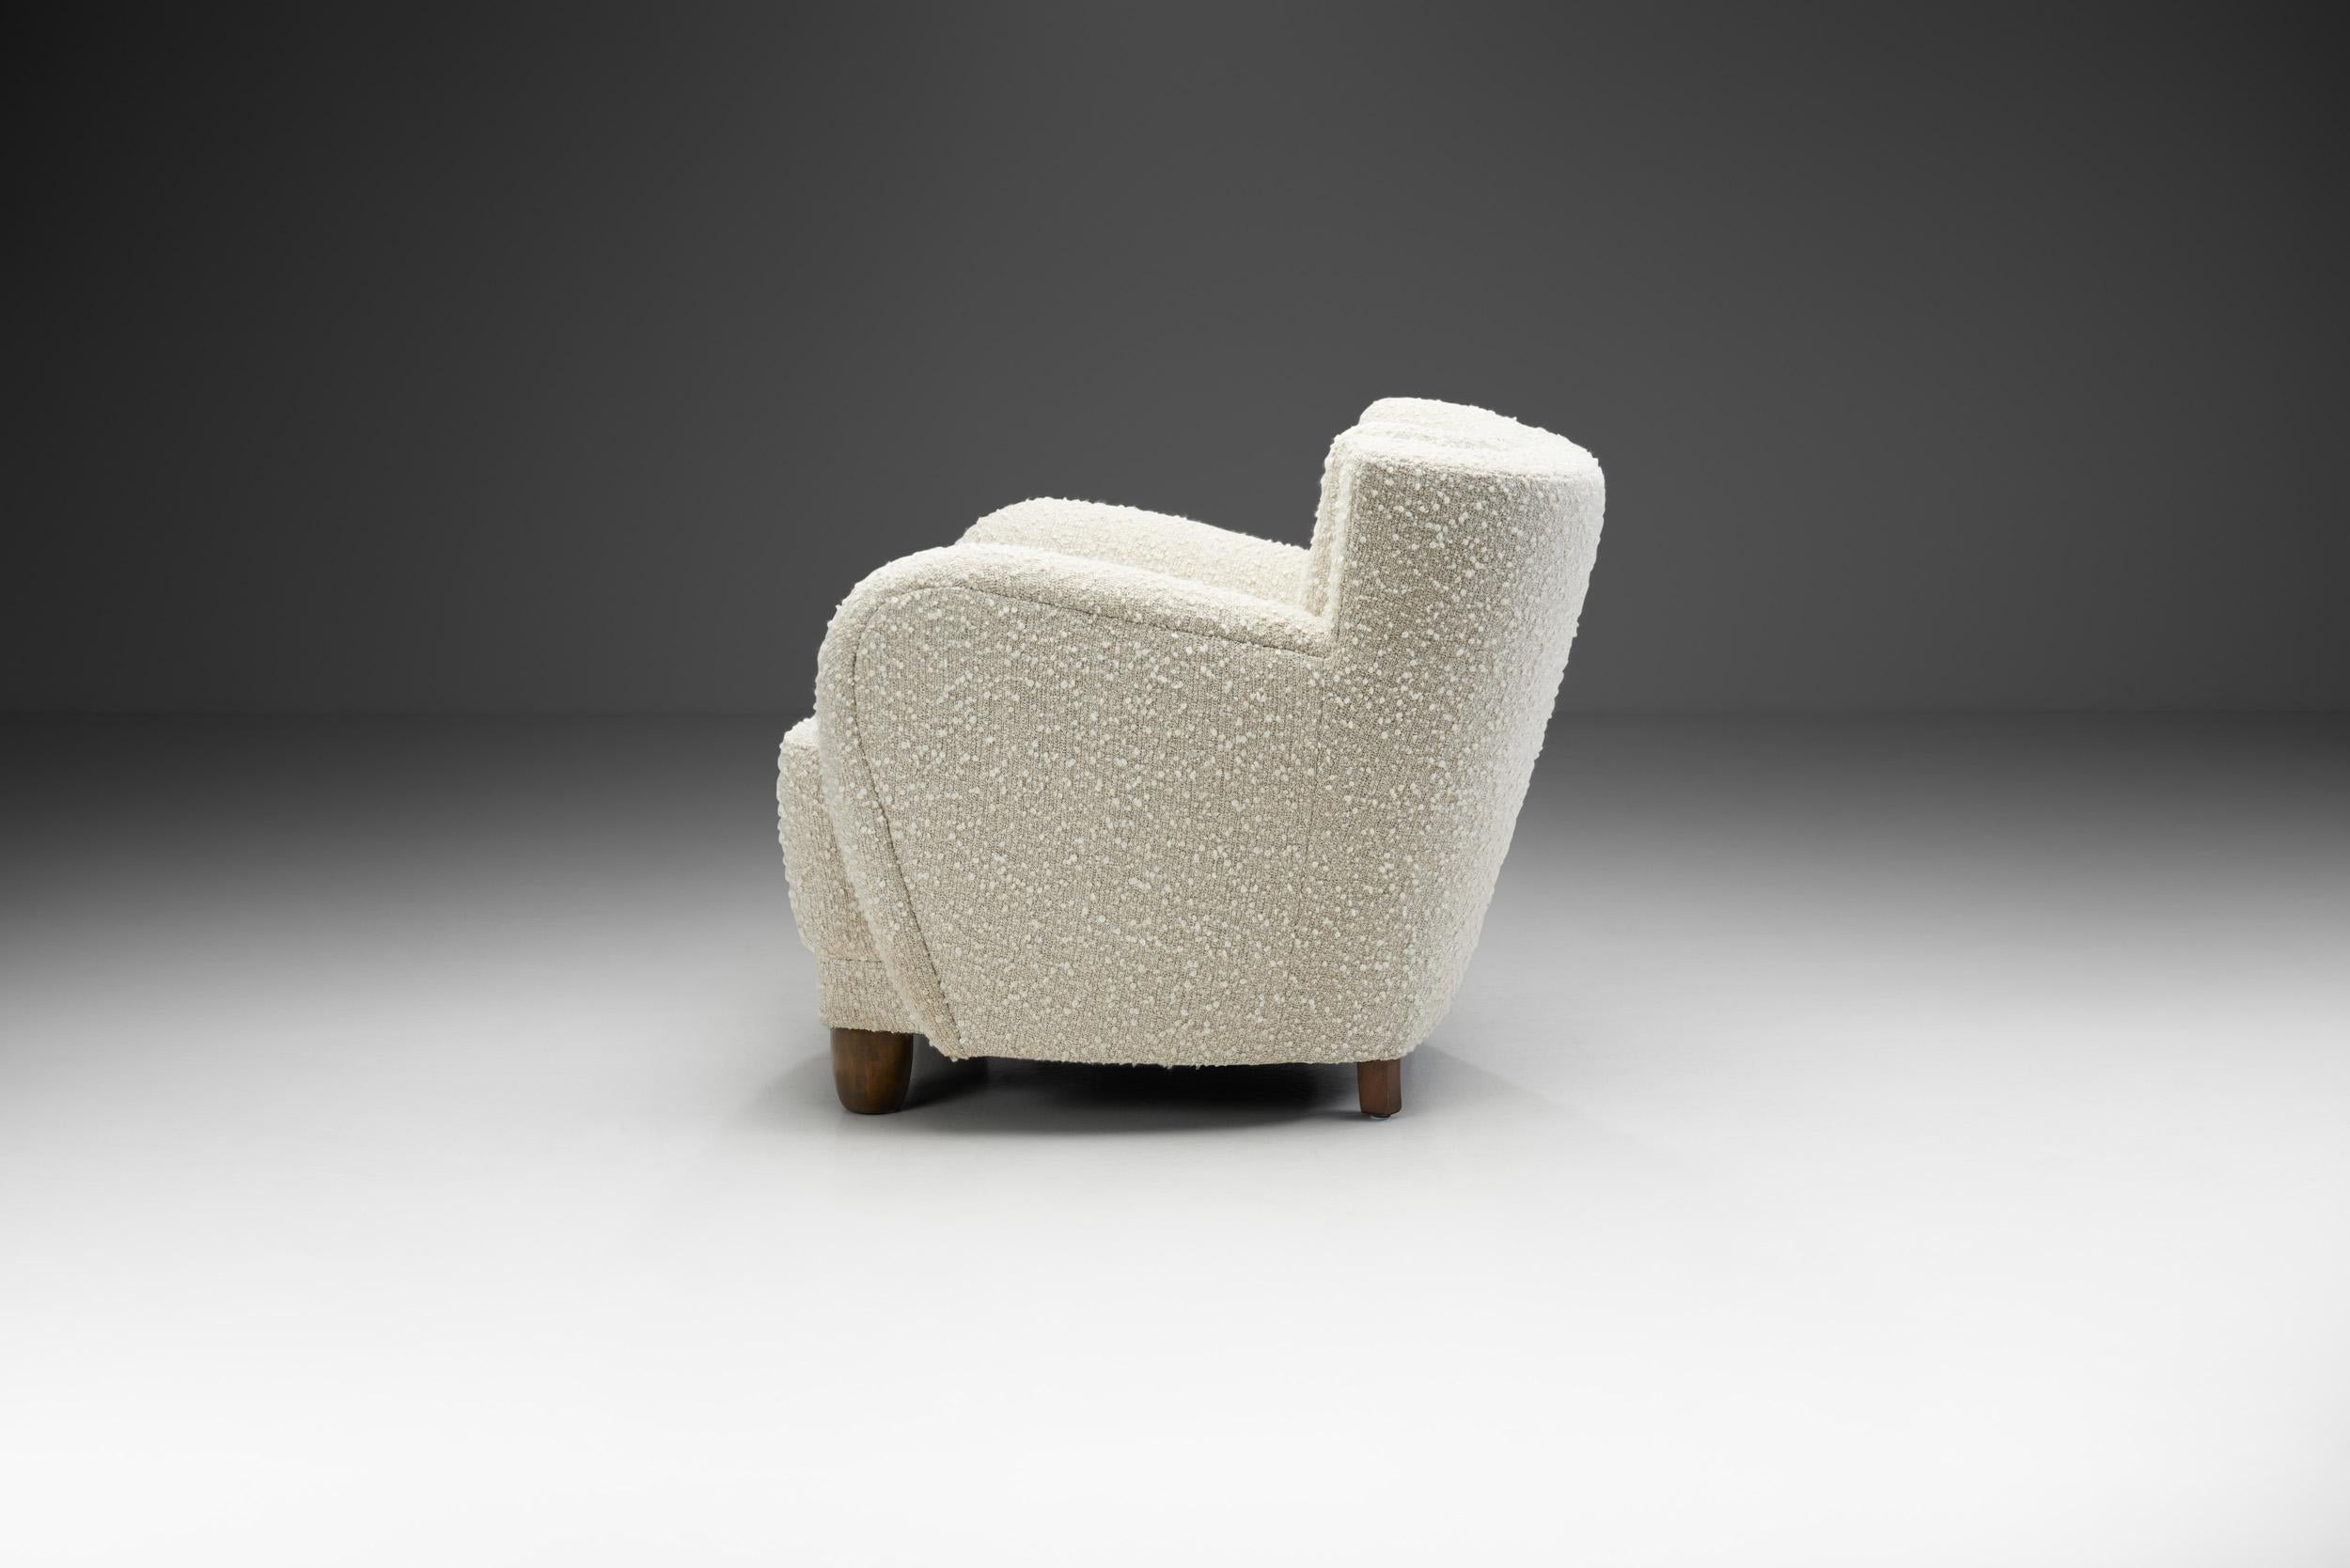 Scandinavian Modern Danish Armchair with Stained Wood Legs and Bouclé Upholstery, Denmark, 1940s